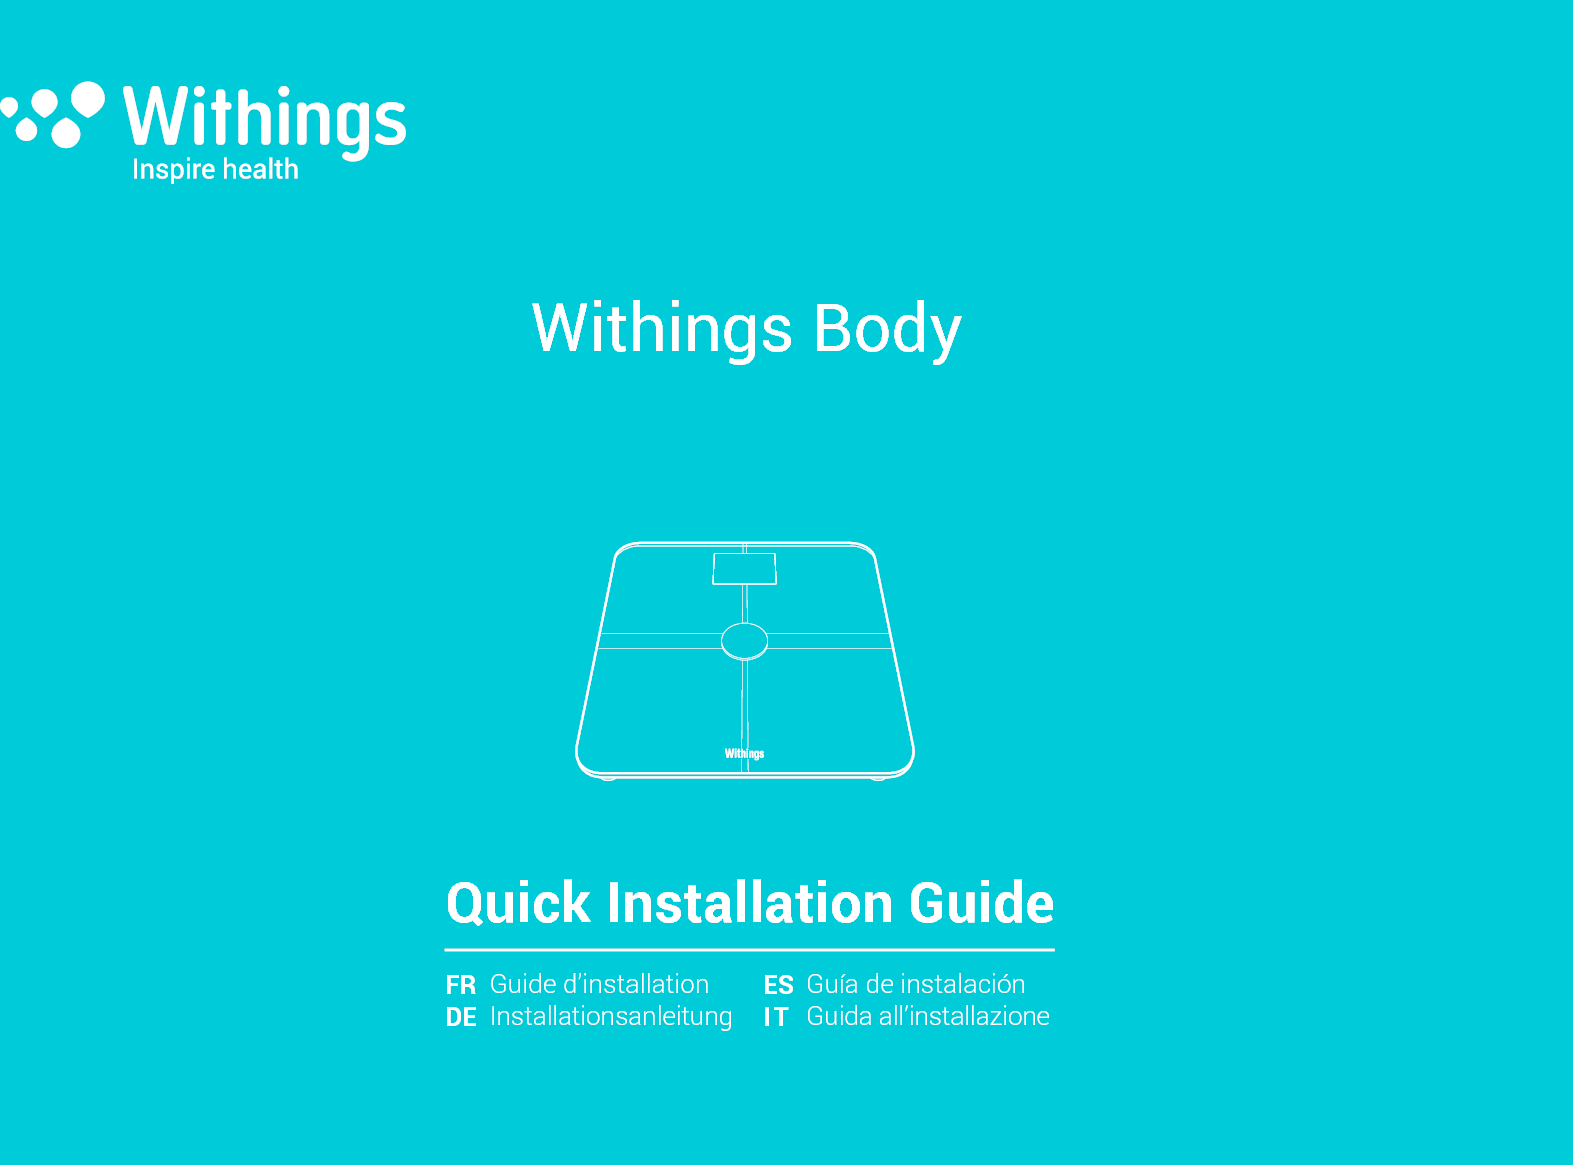  Withings BodyQuick Installation GuideFRDEESITGuide d’installationInstallationsanleitungGuía de instalaciónGuida all’installazione